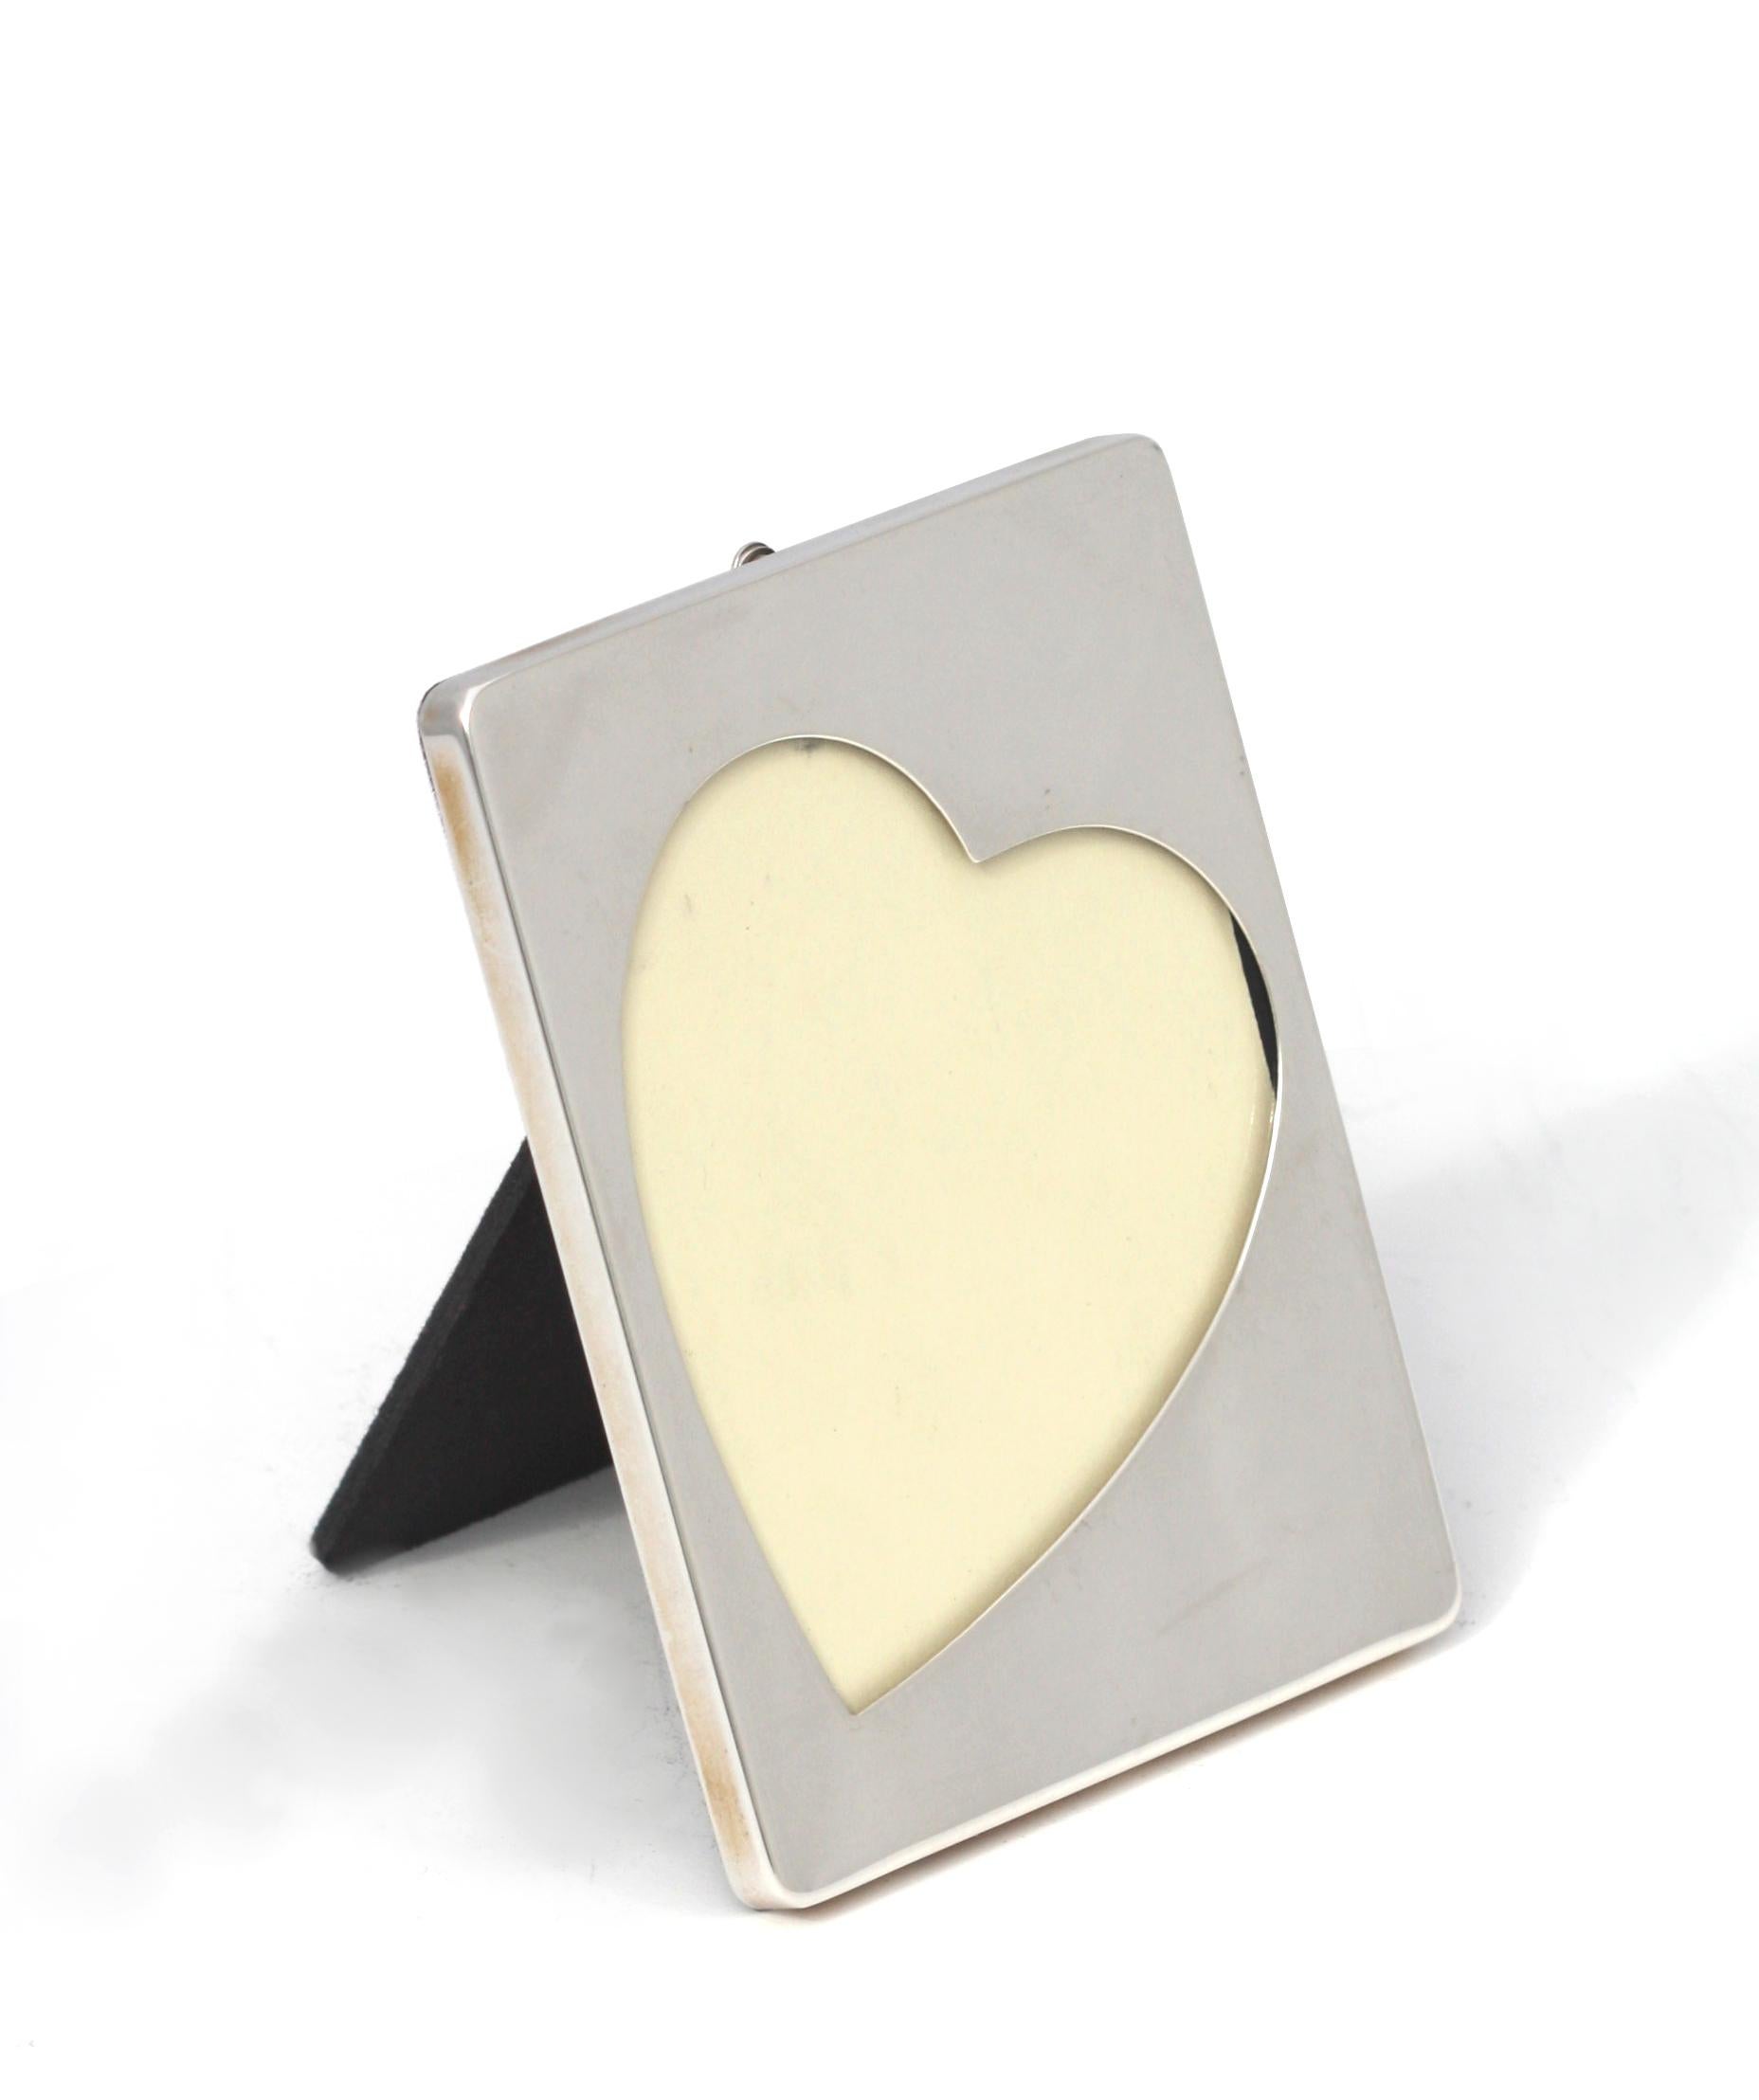 
American Sterling Silver Picture Frame
Marked Sterling, and with a C and a scepter.Rectangular, with a heart-shaped opening.
4 by 3 in., .73 troy ozs.